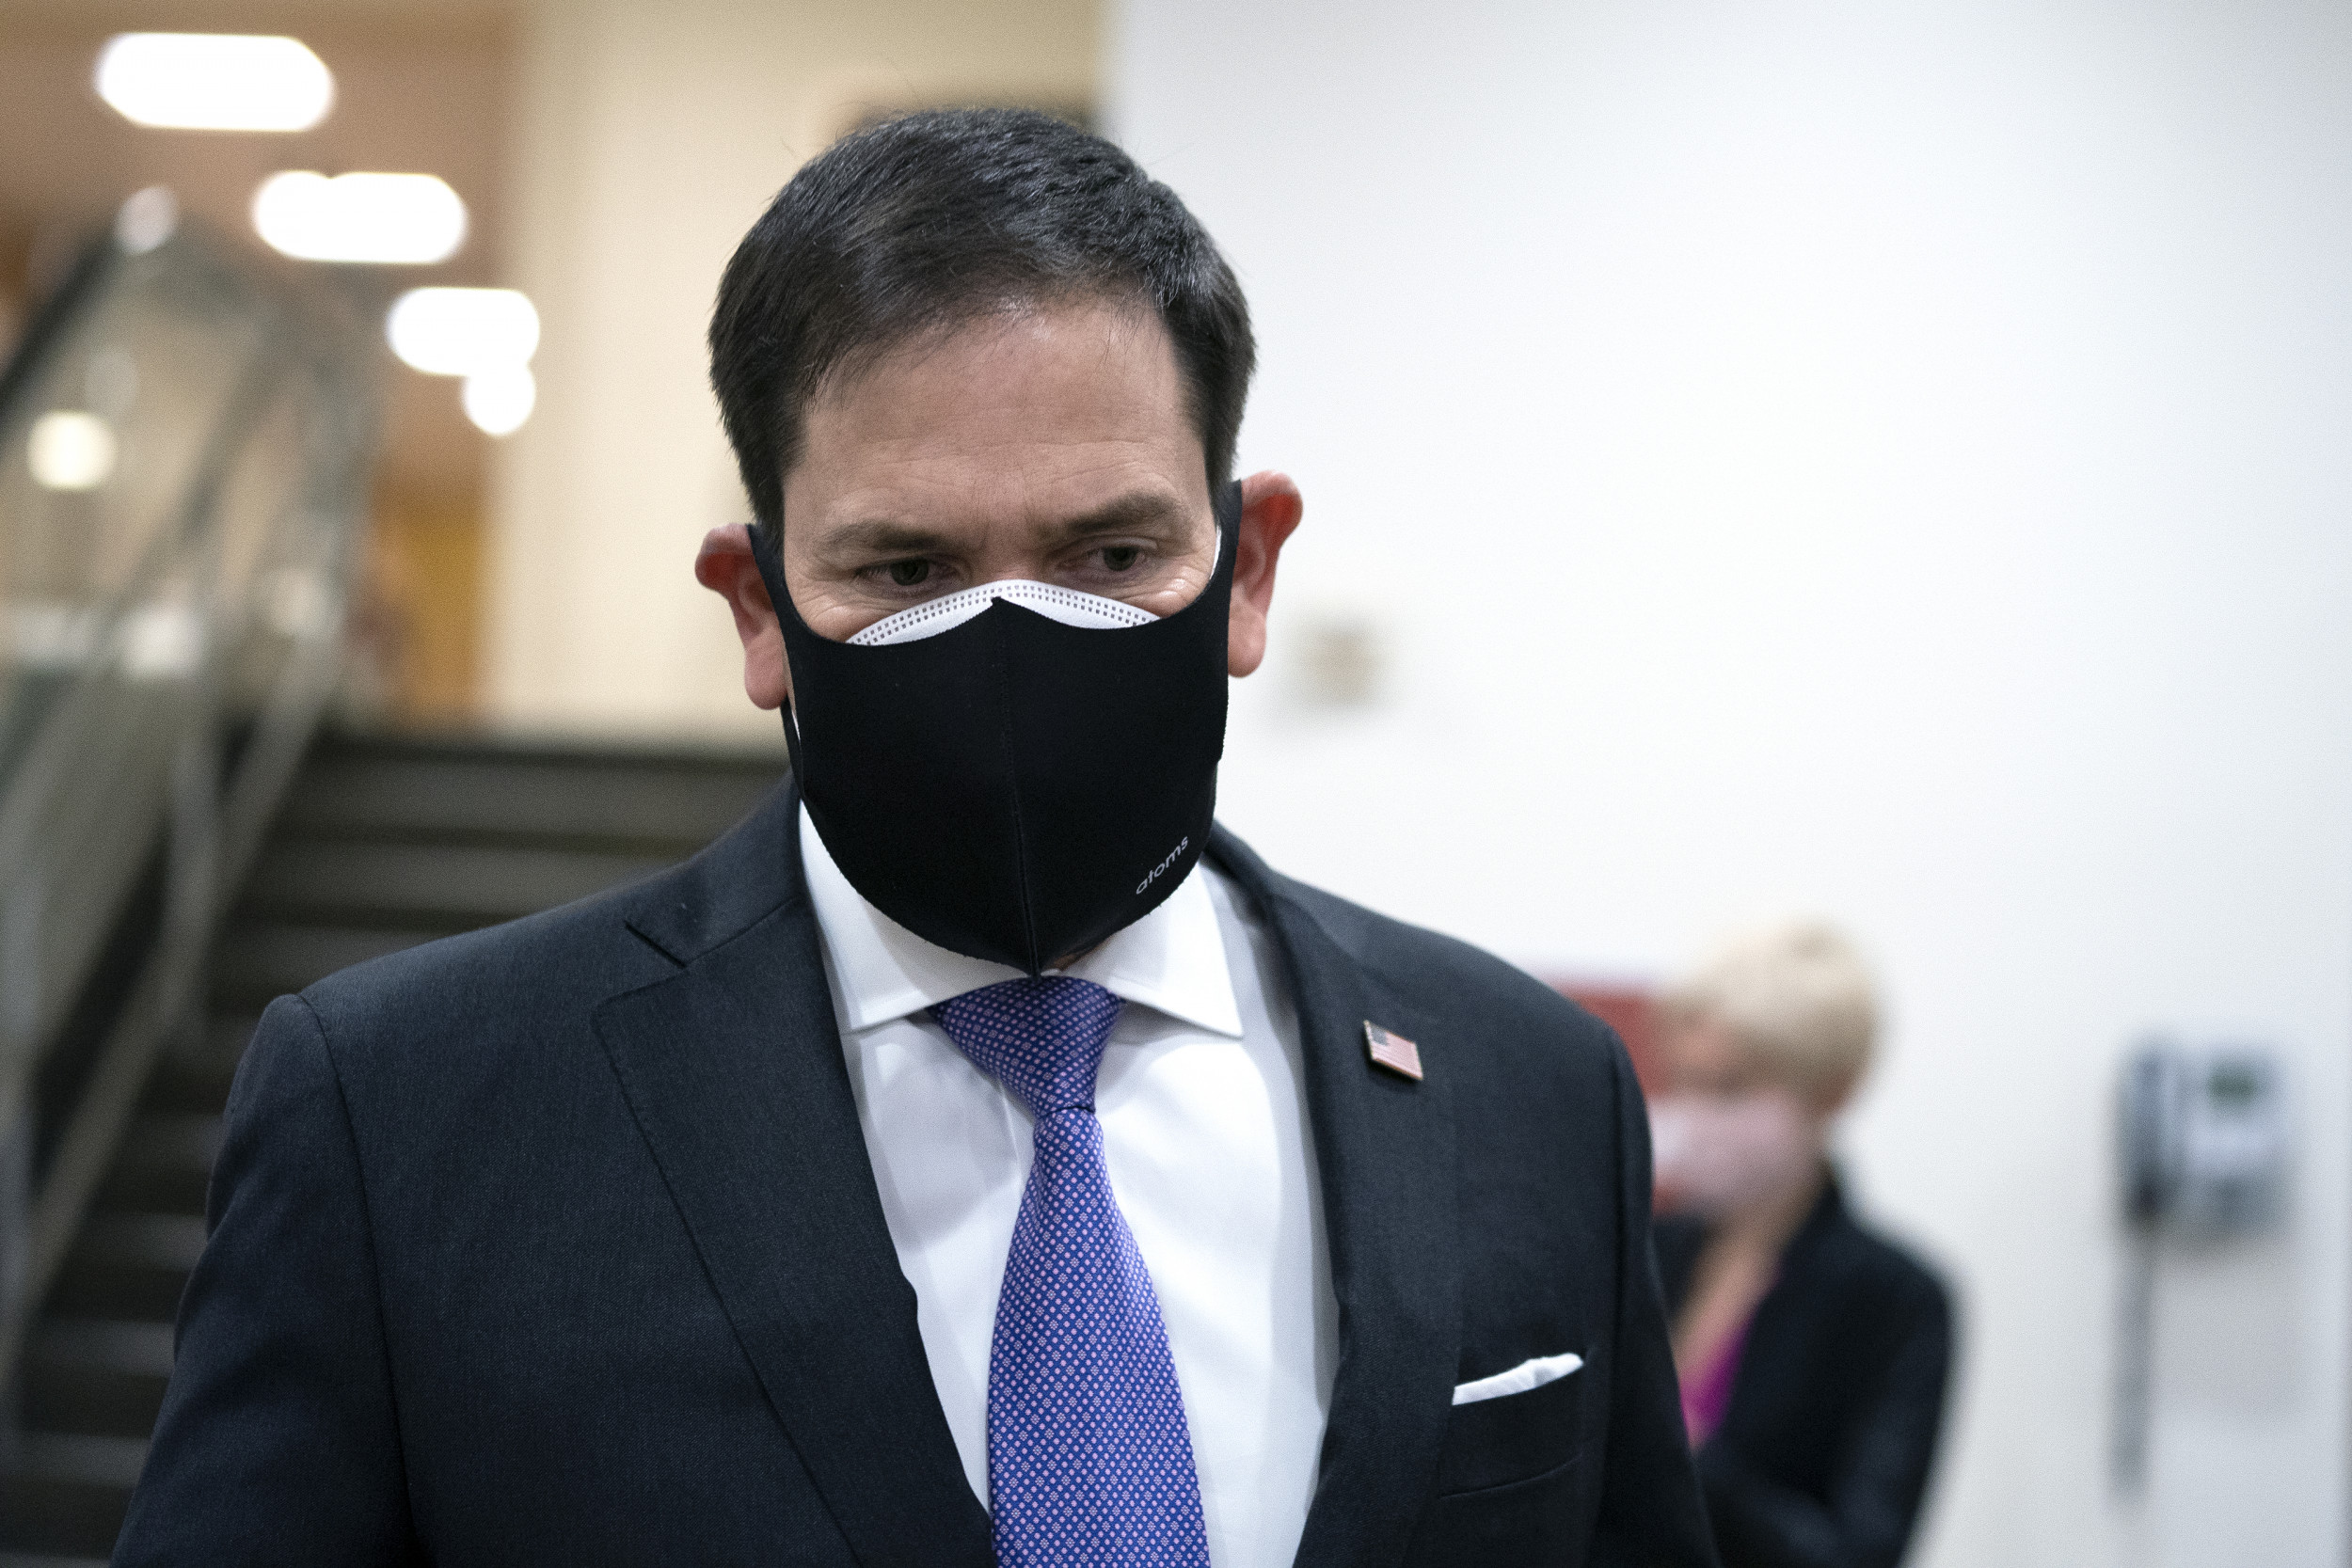 Marco Rubio tracks down Fauci, says he ‘leans over masks’ and ‘twisted’ herd immunity